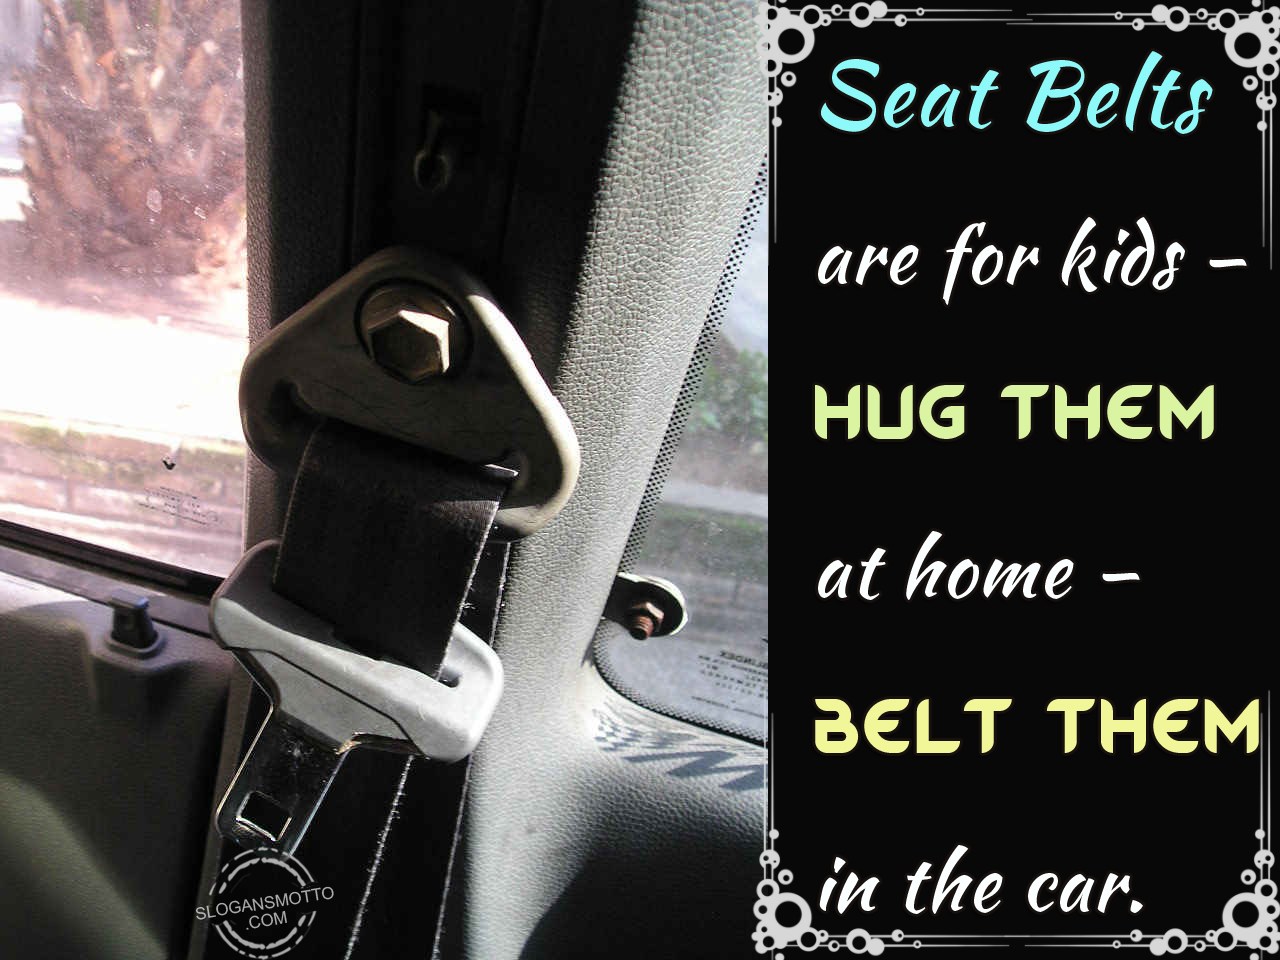 Seat Belts are for kids - Hug them at home - Belt them in the car. 